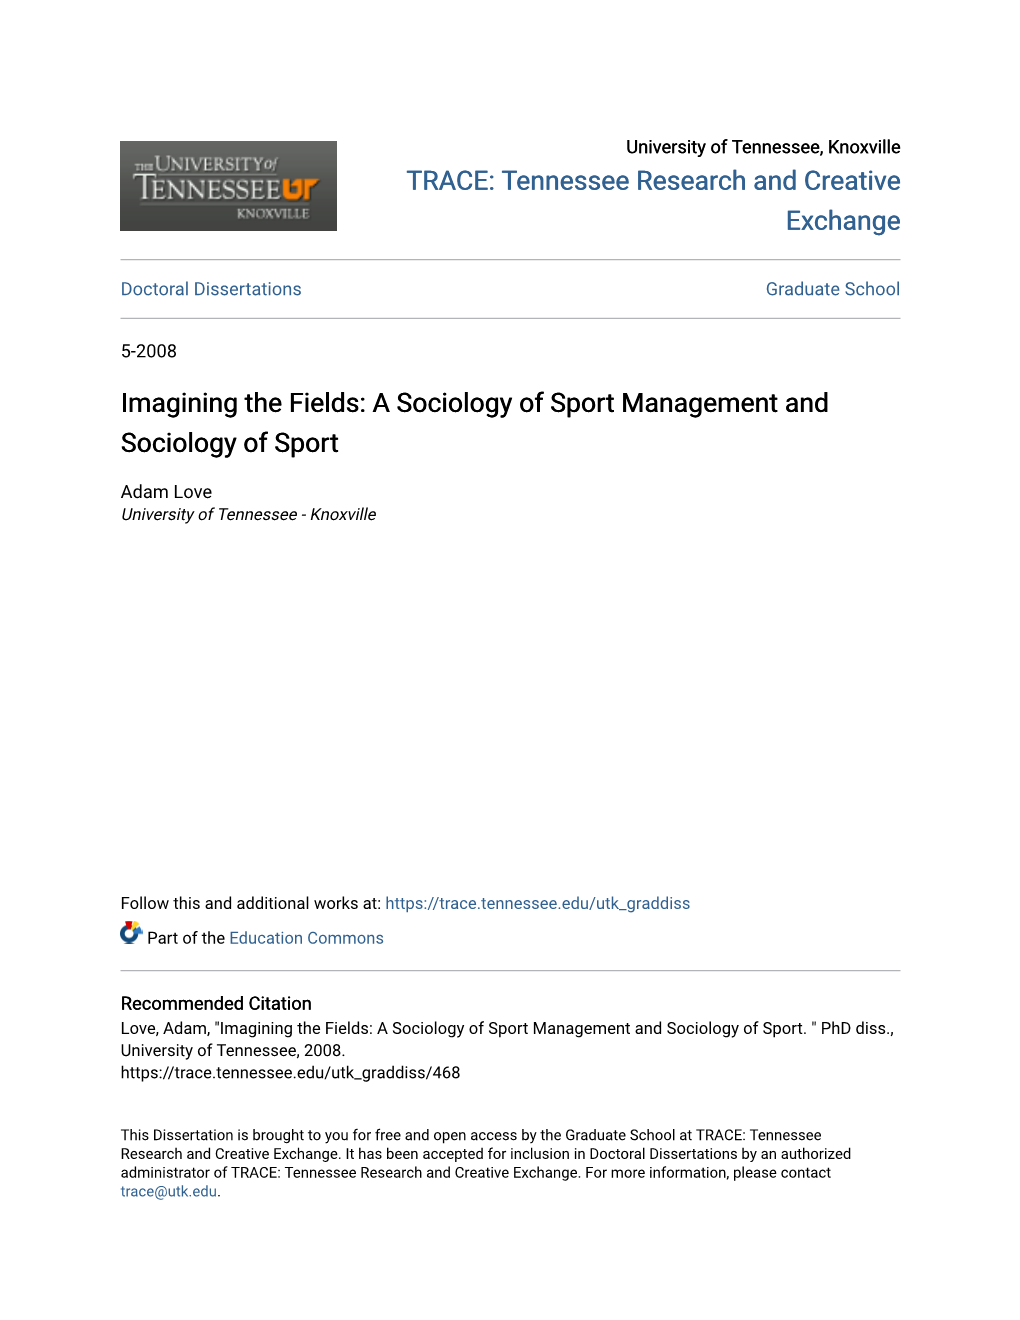 Imagining the Fields: a Sociology of Sport Management and Sociology of Sport